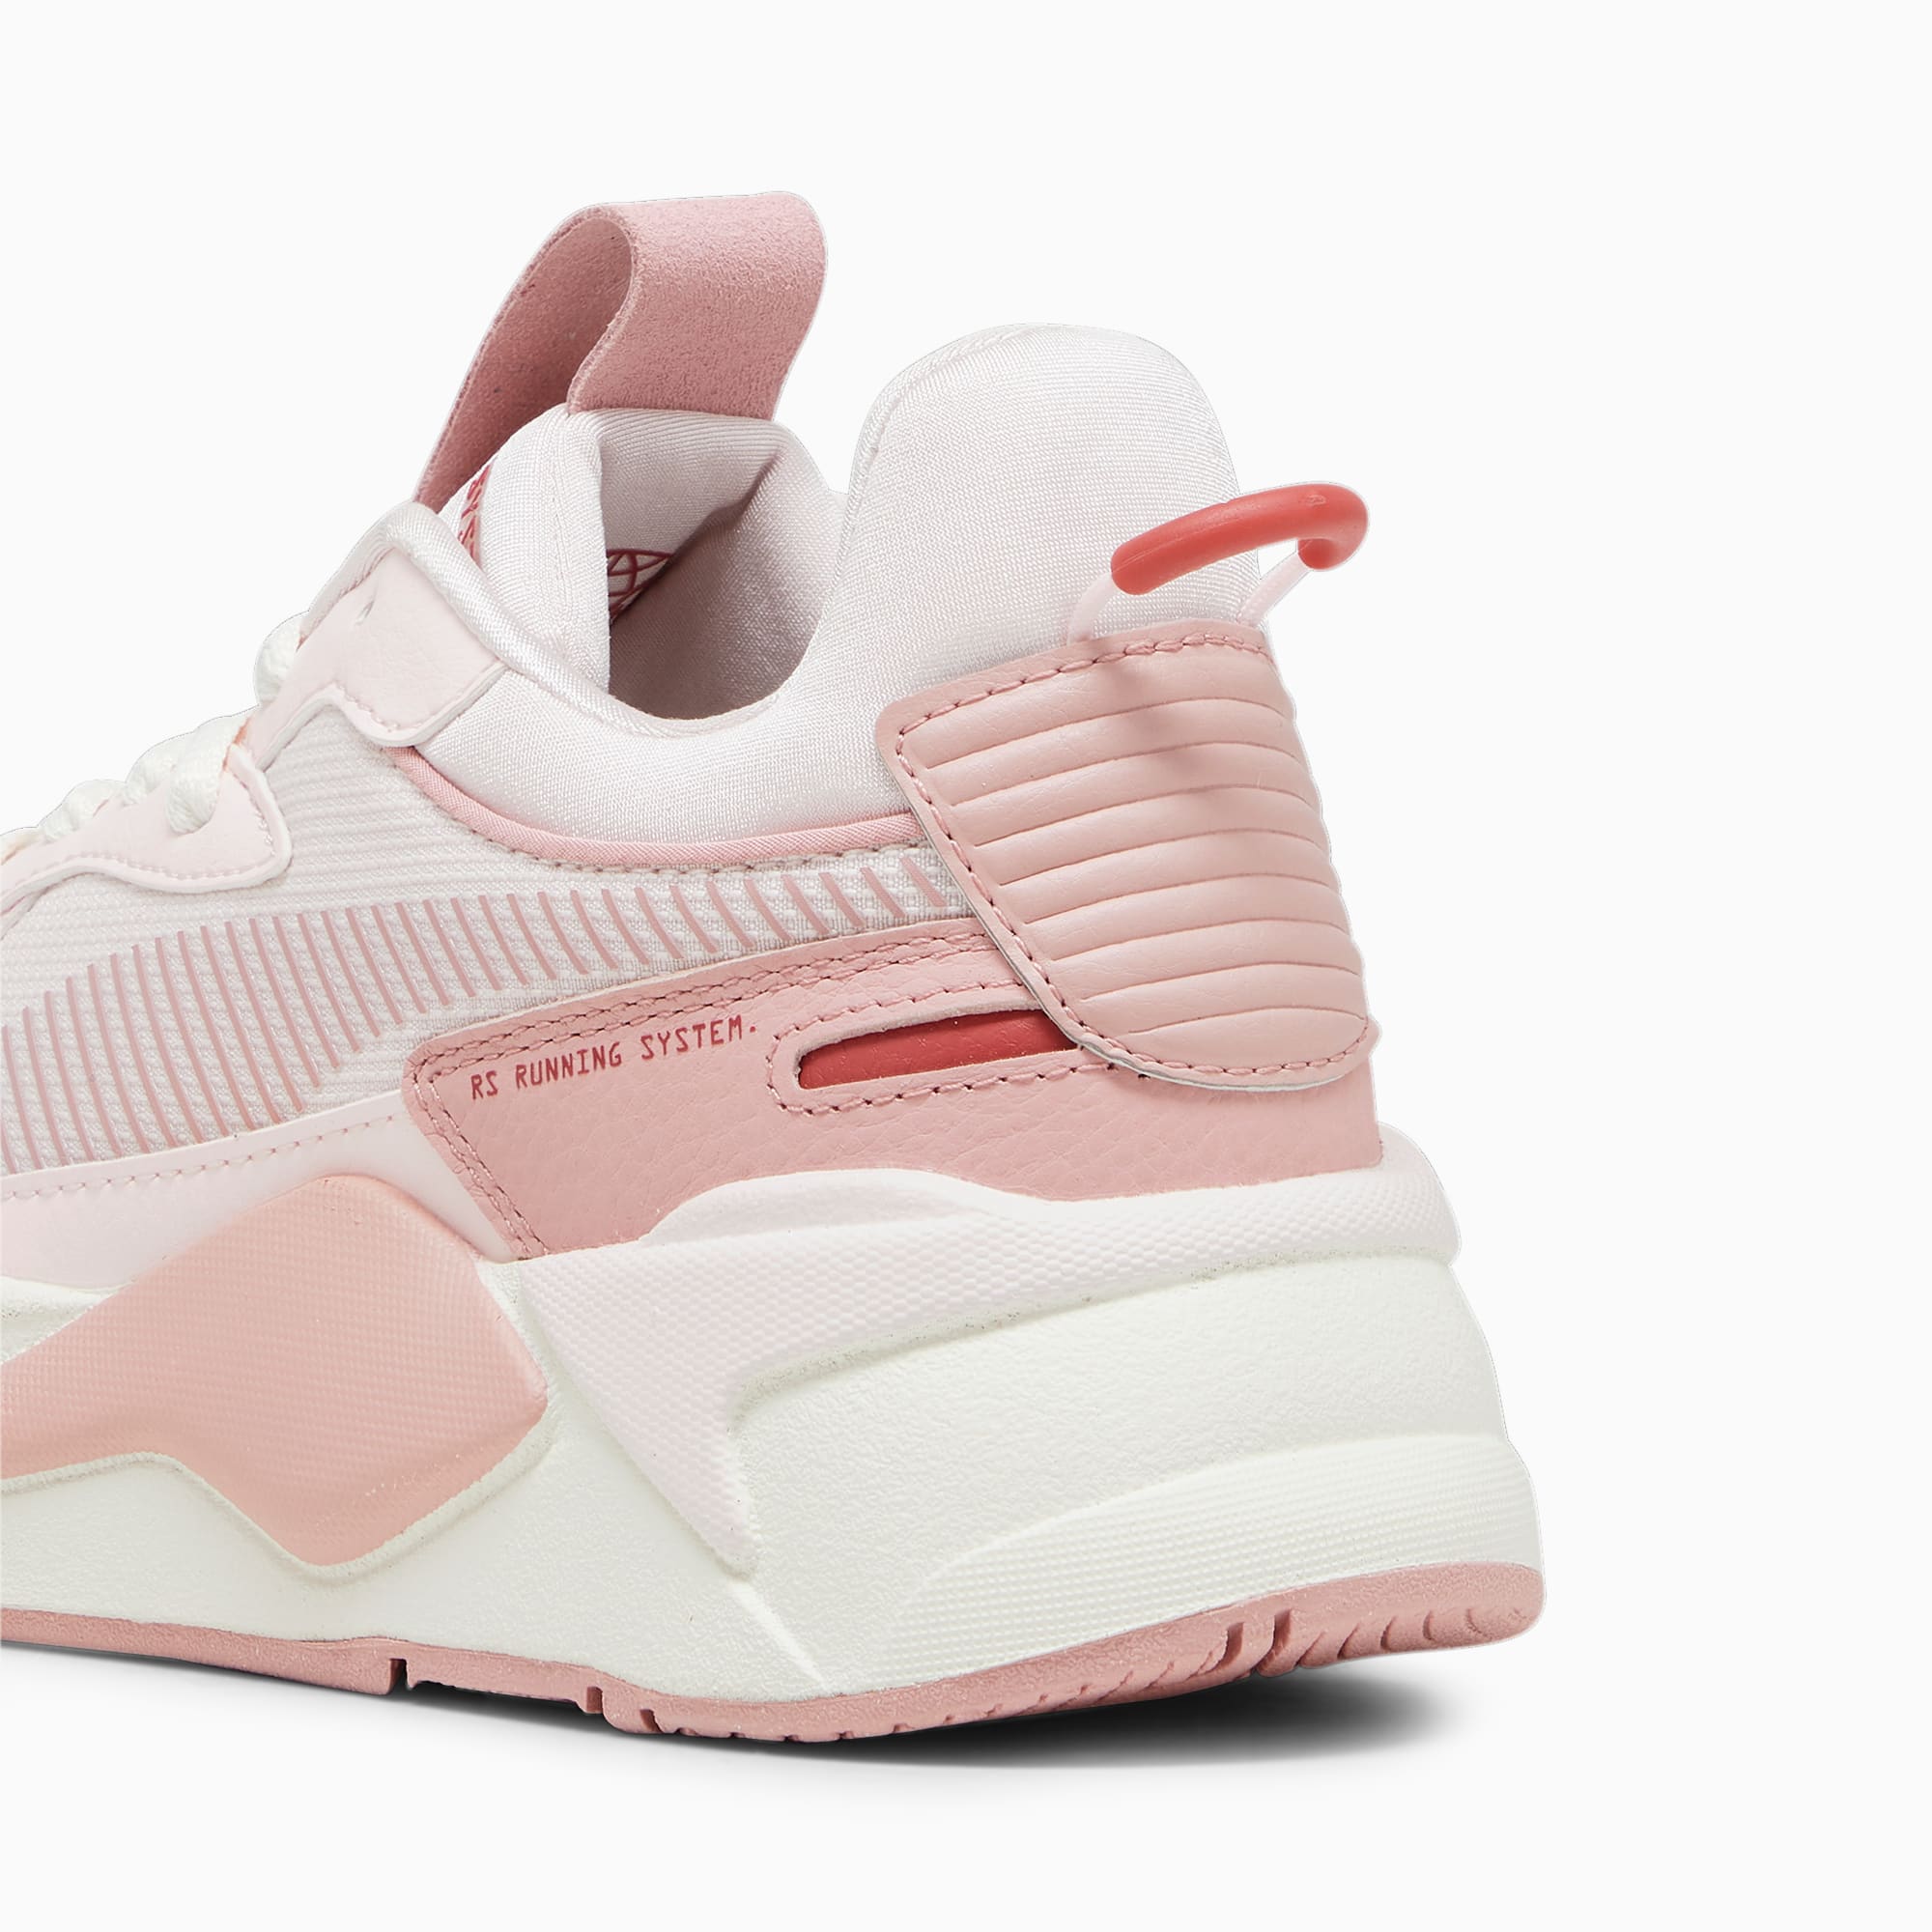 PUMA Rs-X Soft Women's Sneakers, Frosty Pink/Warm White